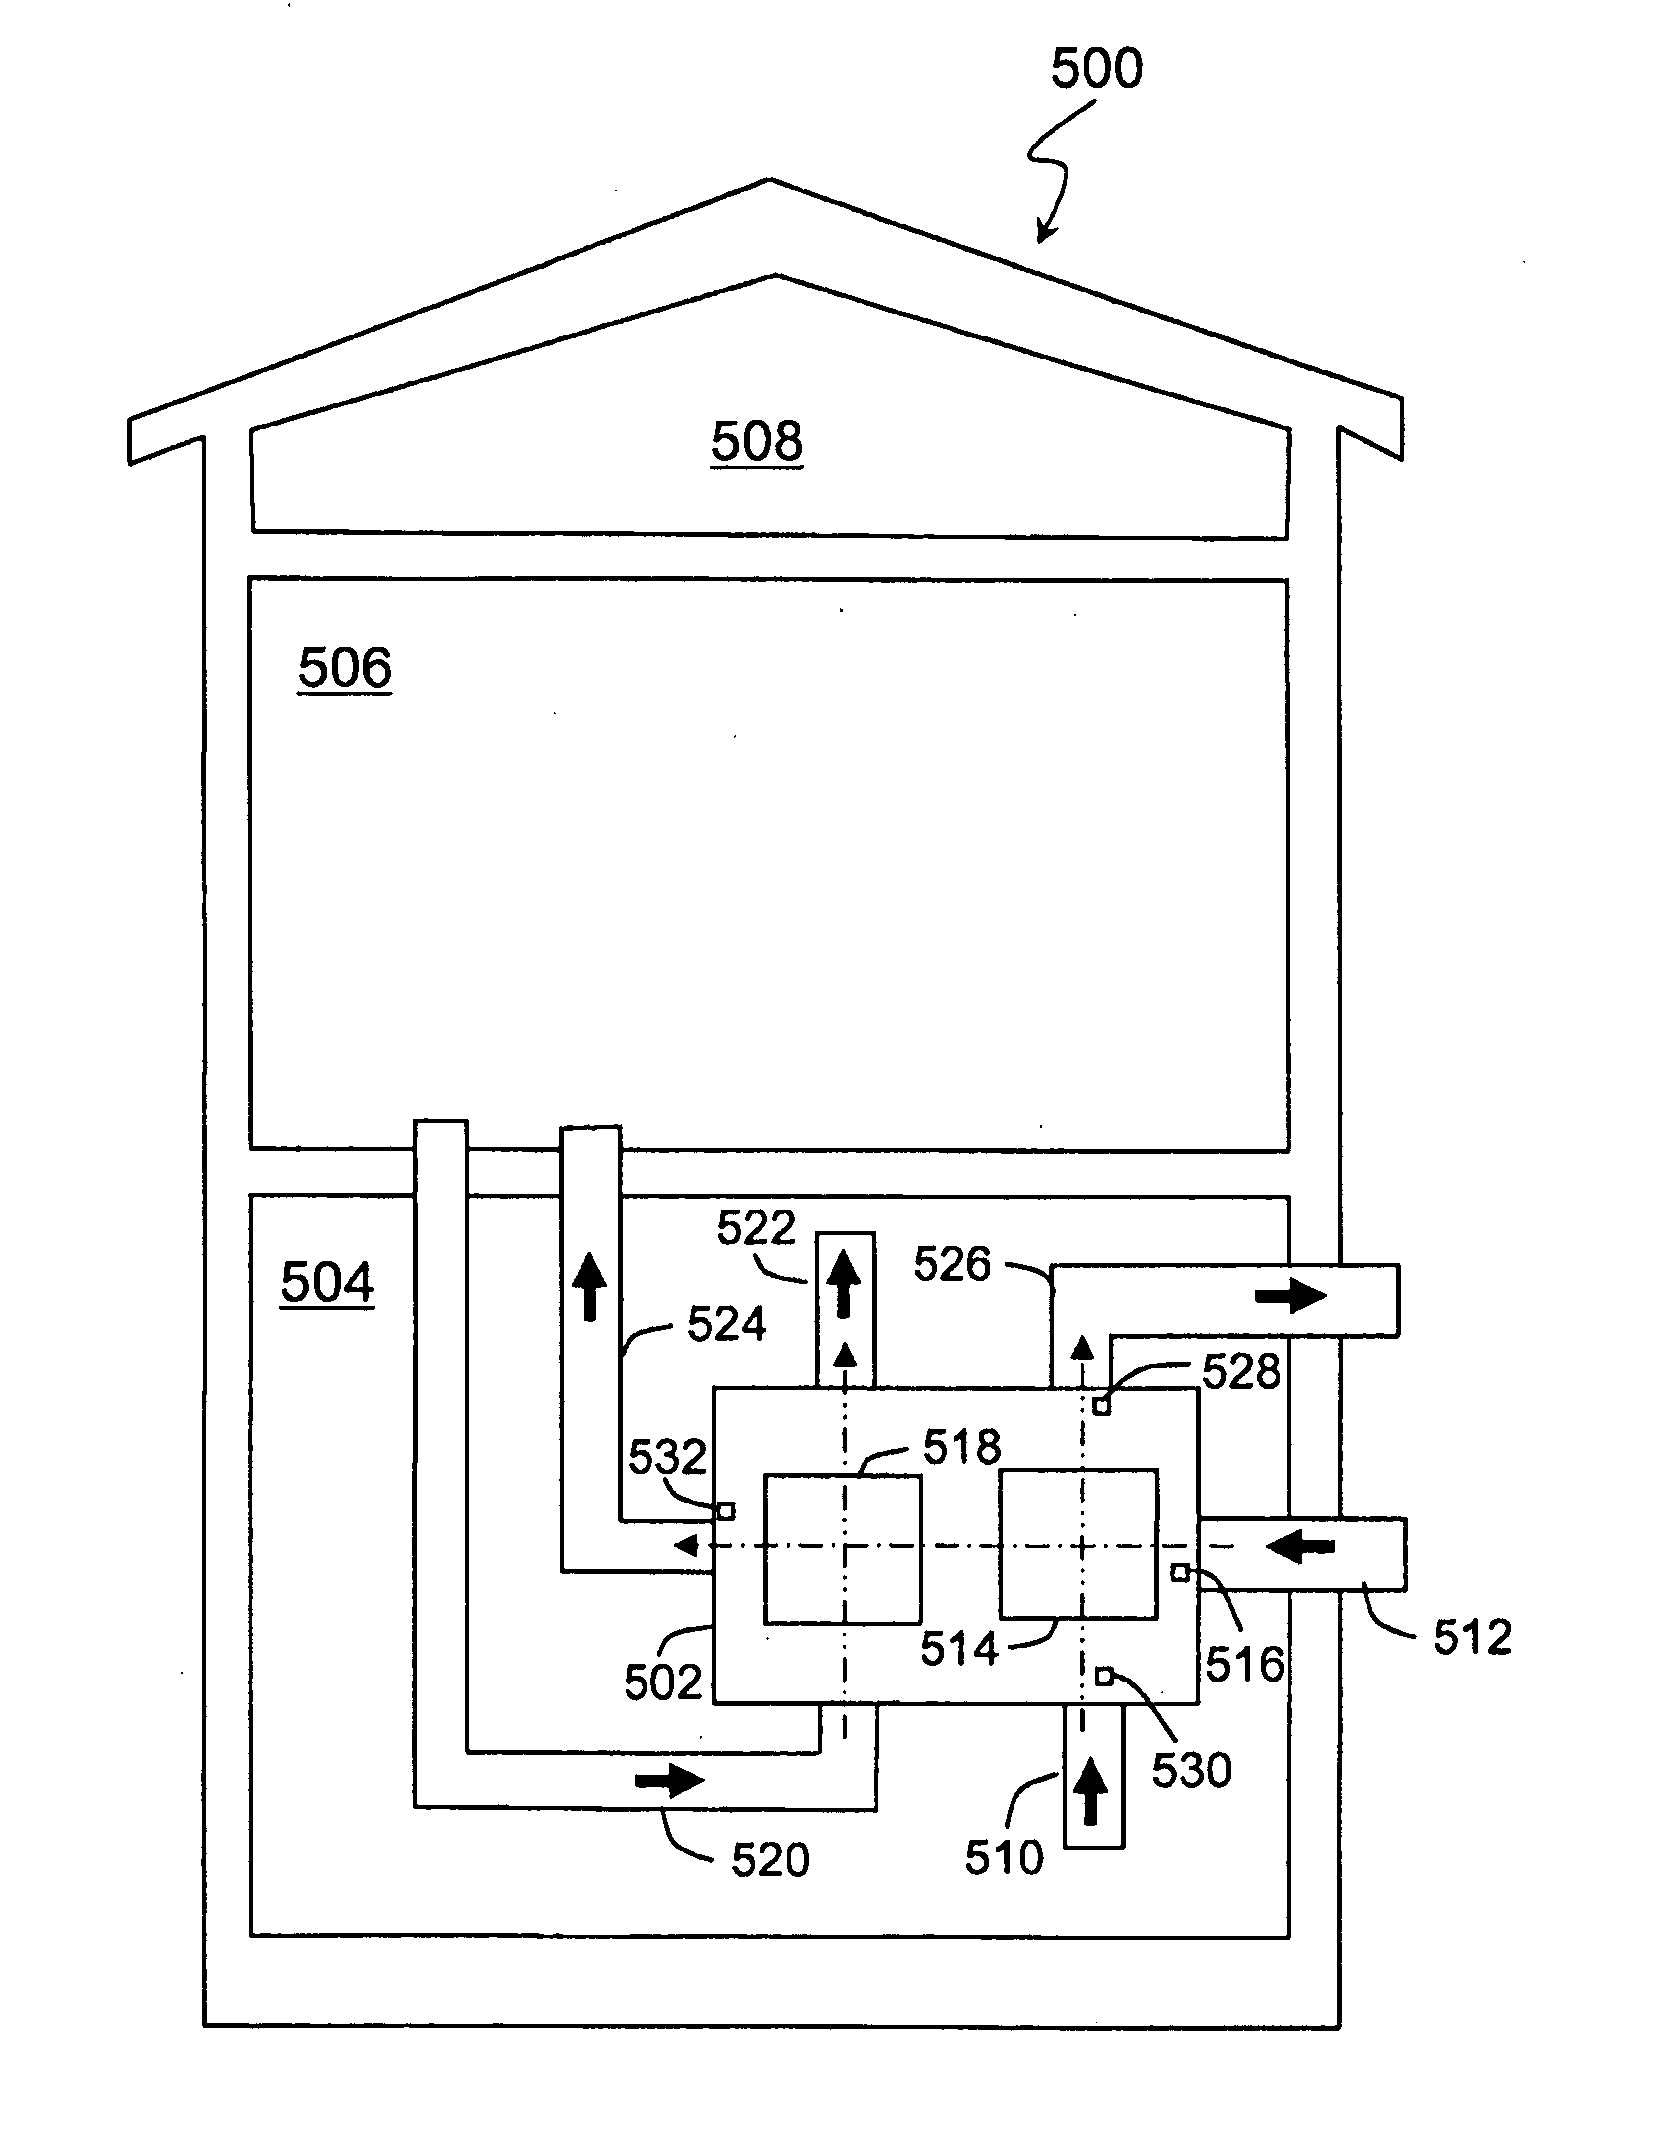 Method and apparatus for controlling ventilation systems